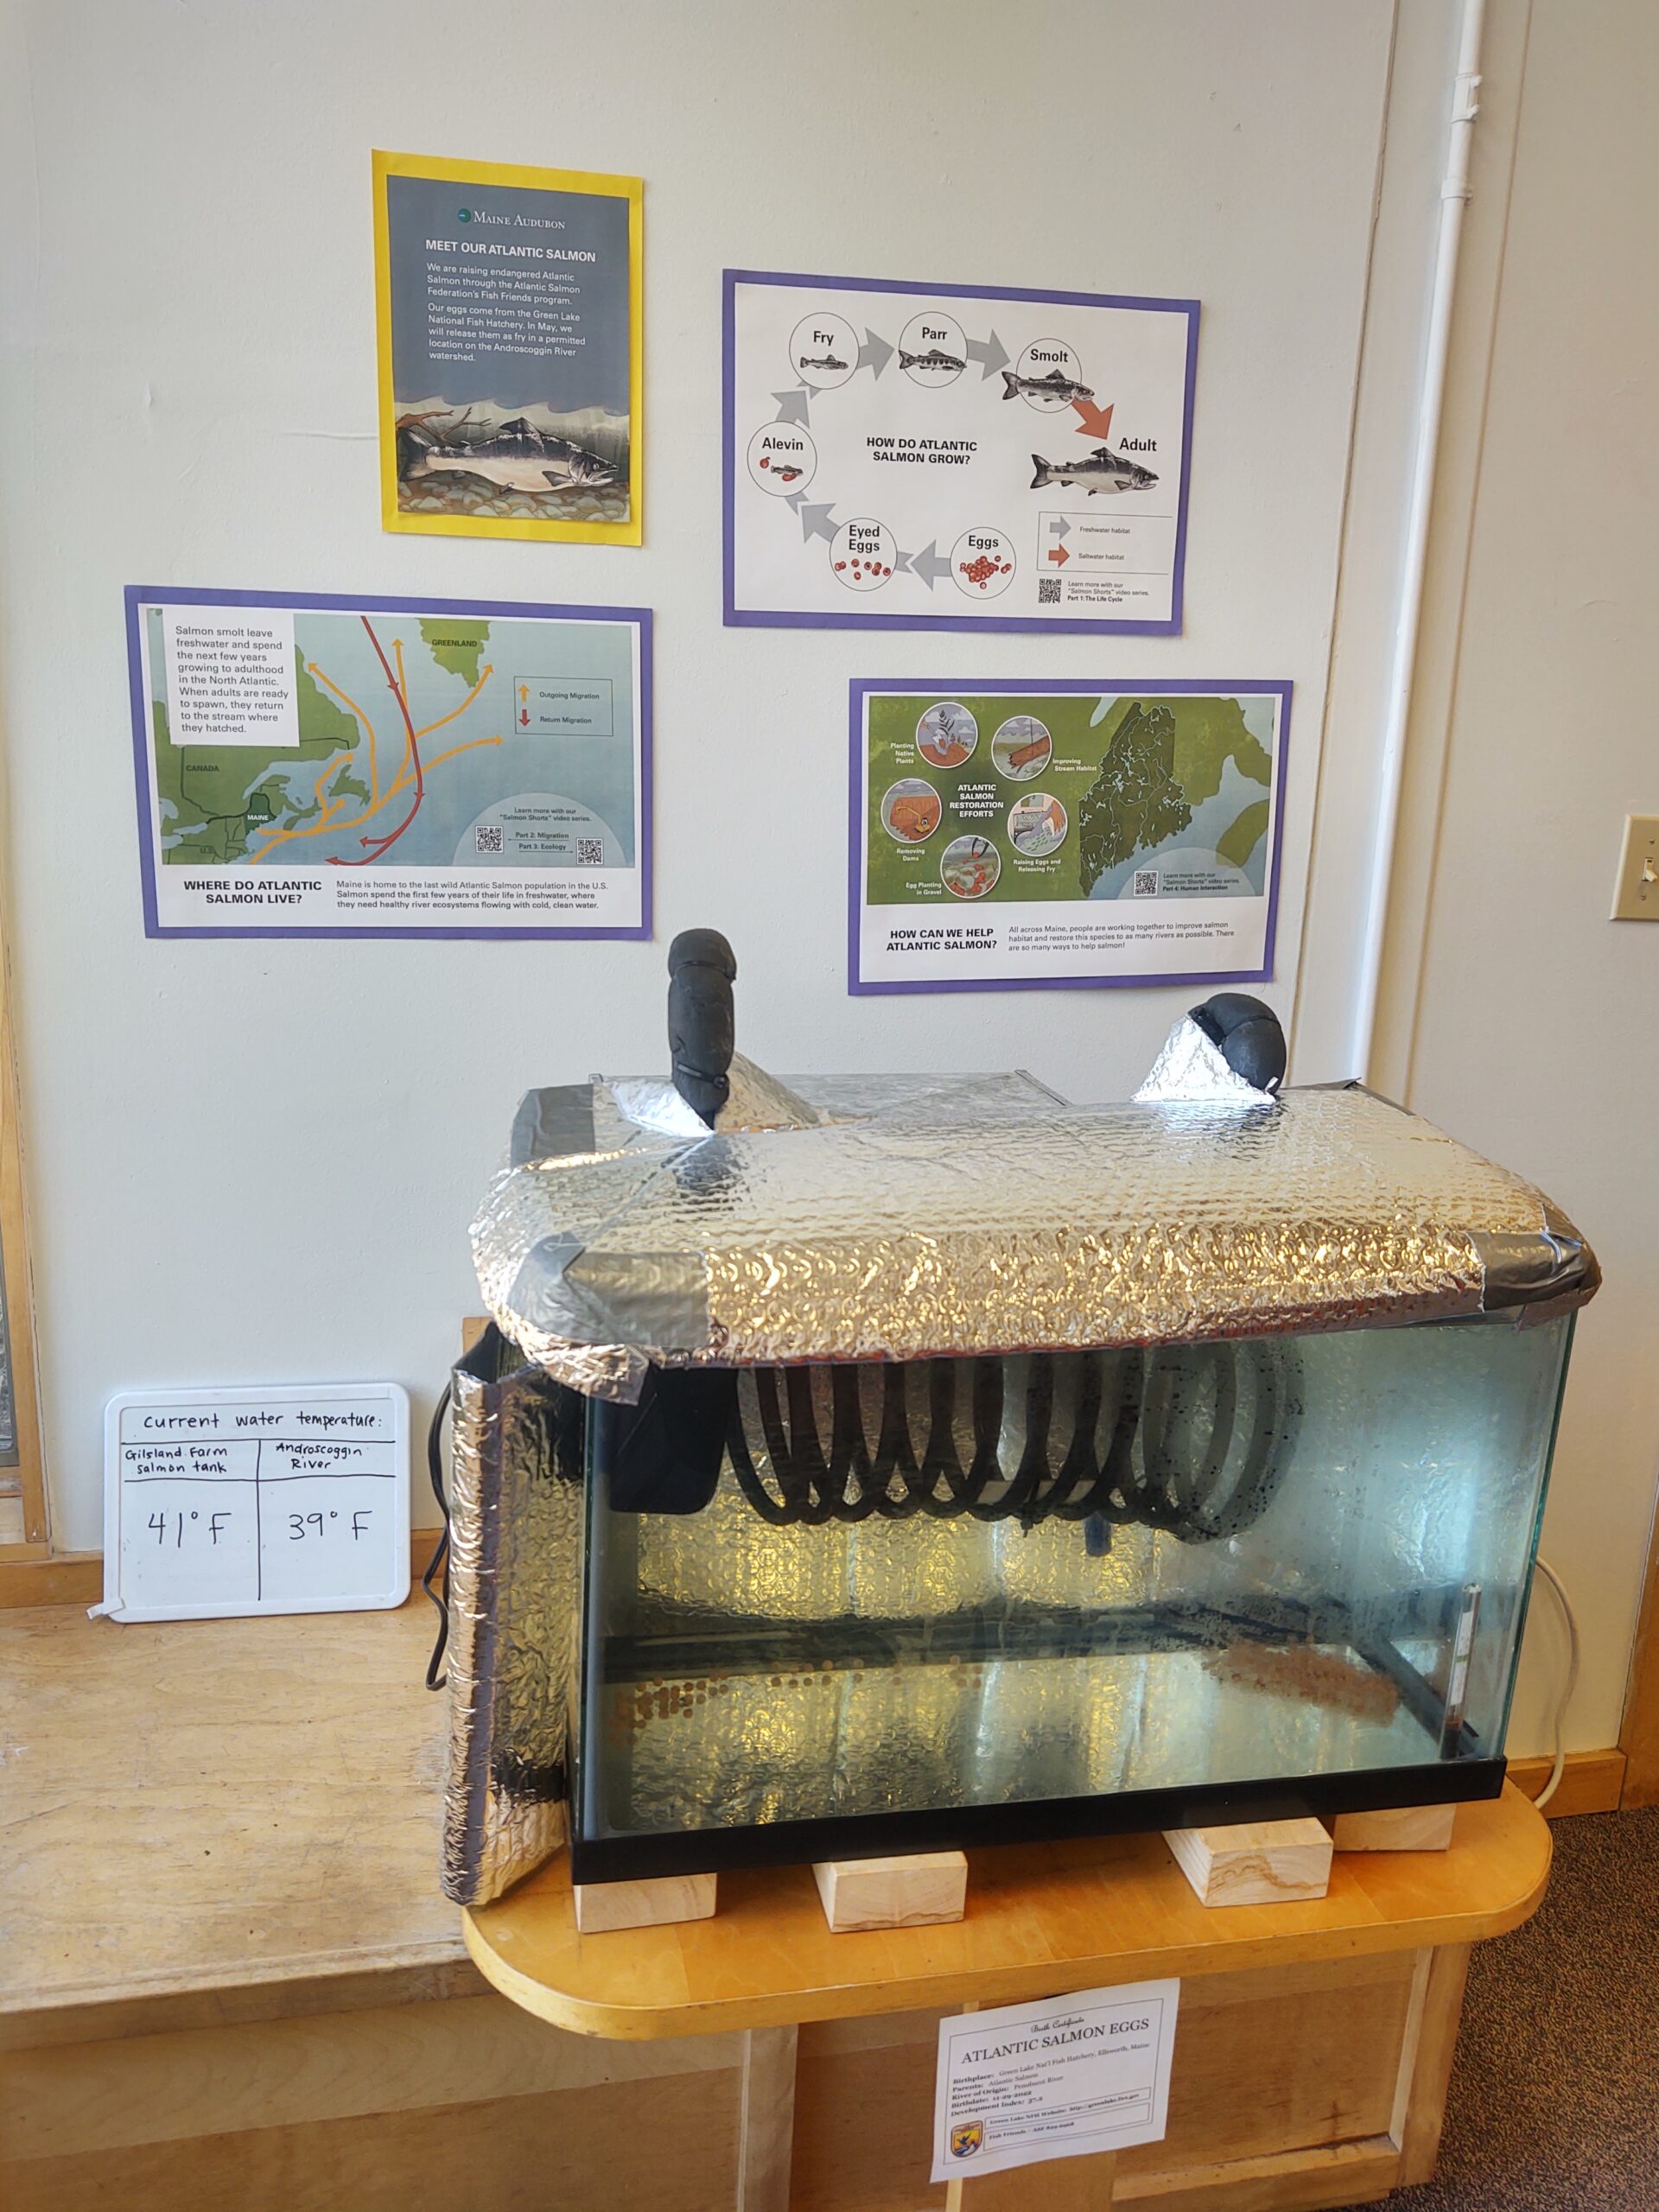 Come visit our centers to see Atlantic Salmon eggs hatching